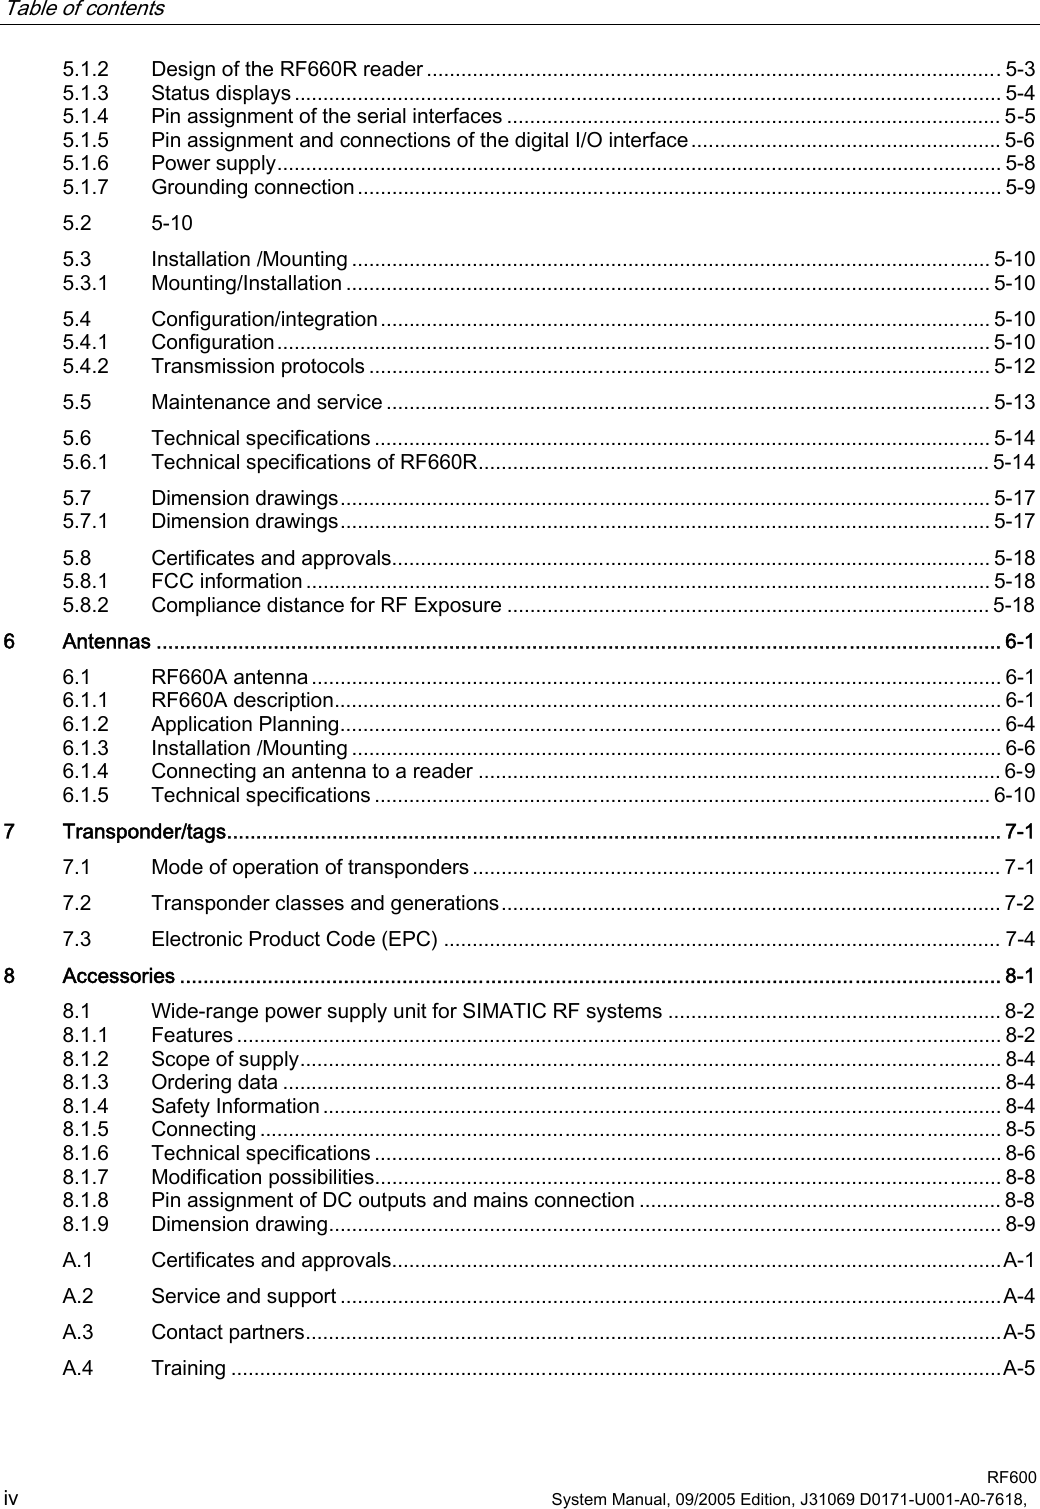 Table of contents    RF600 iv  System Manual, 09/2005 Edition, J31069 D0171-U001-A0-7618,   5.1.2 Design of the RF660R reader ....................................................................................................5-3 5.1.3 Status displays ........................................................................................................................... 5-4 5.1.4 Pin assignment of the serial interfaces ...................................................................................... 5-5 5.1.5 Pin assignment and connections of the digital I/O interface...................................................... 5-6 5.1.6 Power supply.............................................................................................................................. 5-8 5.1.7 Grounding connection................................................................................................................ 5-9 5.2  5-10 5.3 Installation /Mounting ............................................................................................................... 5-10 5.3.1 Mounting/Installation ................................................................................................................ 5-10 5.4 Configuration/integration.......................................................................................................... 5-10 5.4.1 Configuration............................................................................................................................ 5-10 5.4.2 Transmission protocols ............................................................................................................ 5-12 5.5 Maintenance and service ......................................................................................................... 5-13 5.6 Technical specifications ........................................................................................................... 5-14 5.6.1 Technical specifications of RF660R......................................................................................... 5-14 5.7 Dimension drawings................................................................................................................. 5-17 5.7.1 Dimension drawings................................................................................................................. 5-17 5.8 Certificates and approvals........................................................................................................ 5-18 5.8.1 FCC information ....................................................................................................................... 5-18 5.8.2 Compliance distance for RF Exposure .................................................................................... 5-18 6 Antennas ................................................................................................................................................ 6-1 6.1 RF660A antenna ........................................................................................................................ 6-1 6.1.1 RF660A description.................................................................................................................... 6-1 6.1.2 Application Planning................................................................................................................... 6-4 6.1.3 Installation /Mounting ................................................................................................................. 6-6 6.1.4 Connecting an antenna to a reader ........................................................................................... 6-9 6.1.5 Technical specifications ........................................................................................................... 6-10 7 Transponder/tags.................................................................................................................................... 7-1 7.1 Mode of operation of transponders ............................................................................................ 7-1 7.2 Transponder classes and generations....................................................................................... 7-2 7.3 Electronic Product Code (EPC) ................................................................................................. 7-4 8 Accessories ............................................................................................................................................ 8-1 8.1 Wide-range power supply unit for SIMATIC RF systems .......................................................... 8-2 8.1.1 Features ..................................................................................................................................... 8-2 8.1.2 Scope of supply.......................................................................................................................... 8-4 8.1.3 Ordering data ............................................................................................................................. 8-4 8.1.4 Safety Information ...................................................................................................................... 8-4 8.1.5 Connecting ................................................................................................................................. 8-5 8.1.6 Technical specifications ............................................................................................................. 8-6 8.1.7 Modification possibilities............................................................................................................. 8-8 8.1.8 Pin assignment of DC outputs and mains connection ............................................................... 8-8 8.1.9 Dimension drawing..................................................................................................................... 8-9 A.1 Certificates and approvals..........................................................................................................A-1 A.2 Service and support ...................................................................................................................A-4 A.3 Contact partners.........................................................................................................................A-5 A.4 Training ......................................................................................................................................A-5  